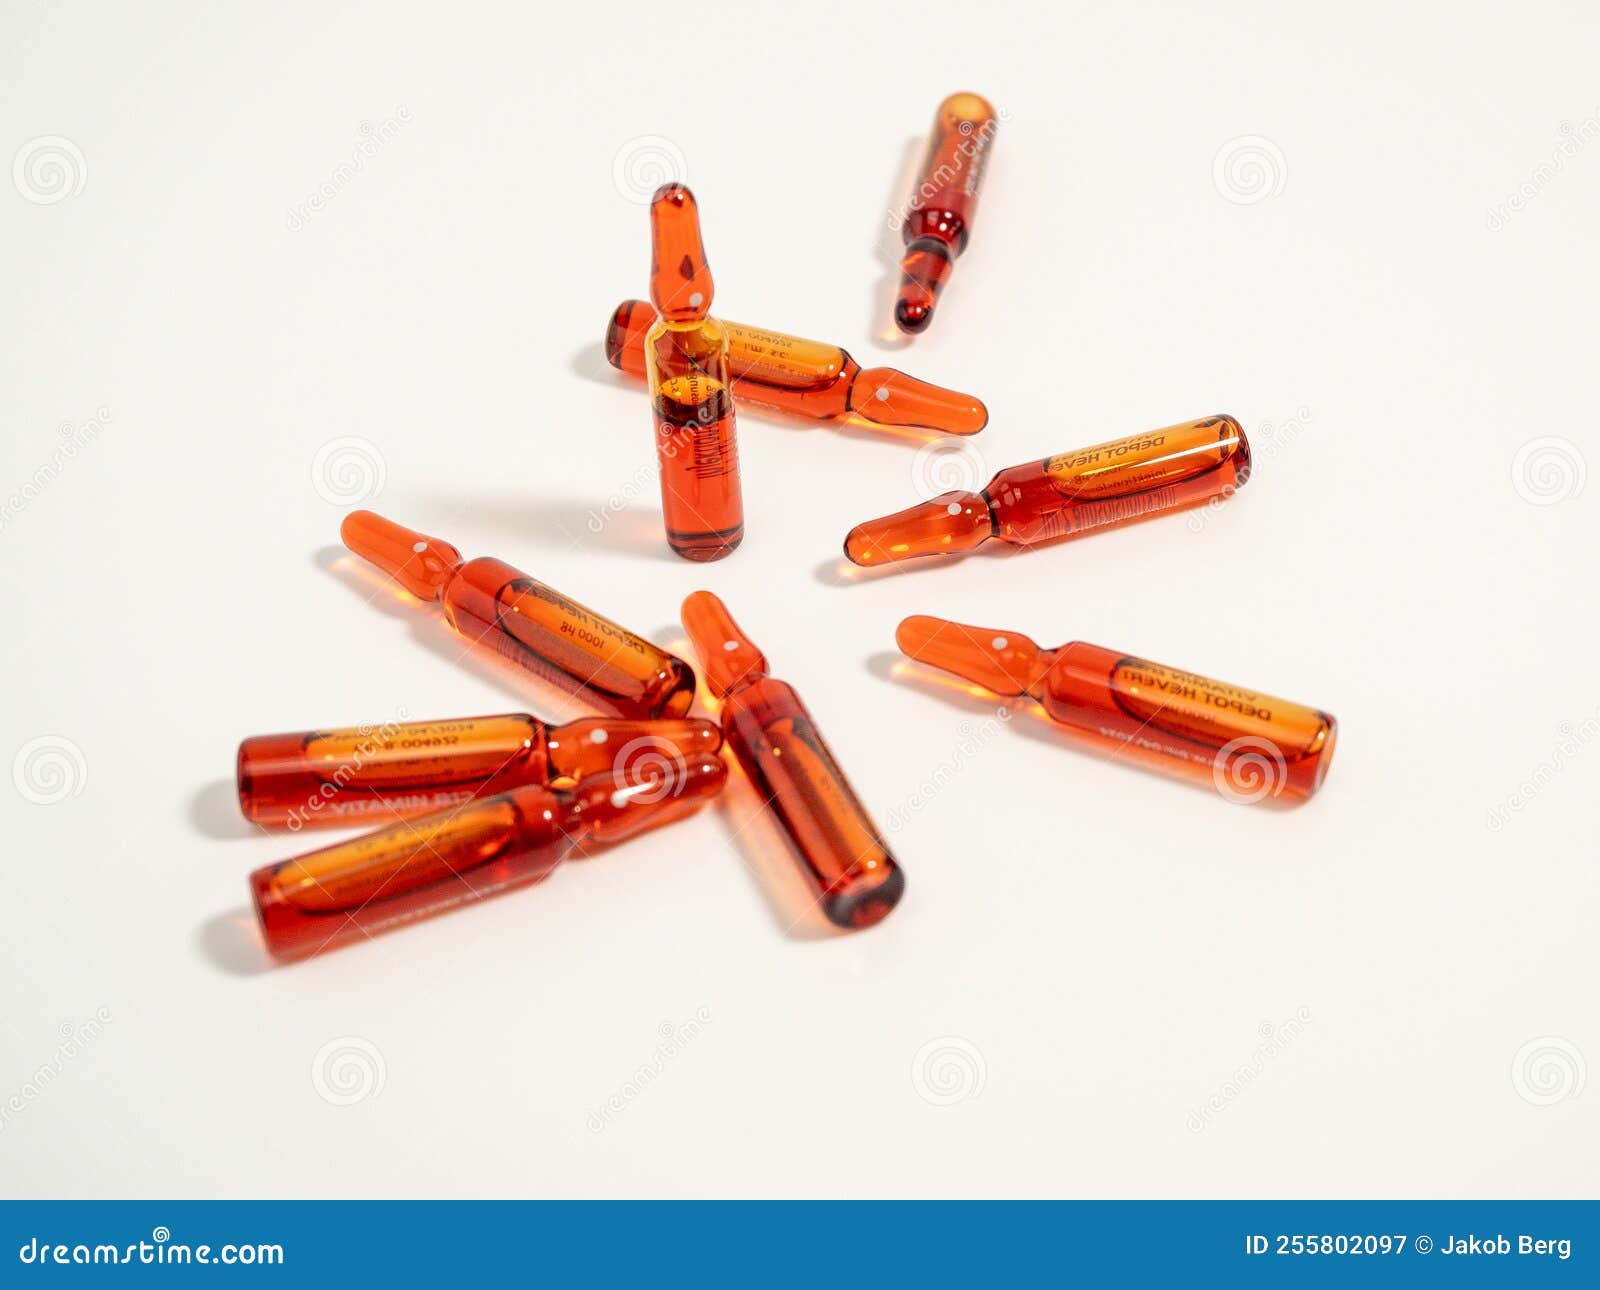 ampoules for vitamin b12 injections. injectable solution ampoules used to supplement vitamin b12.